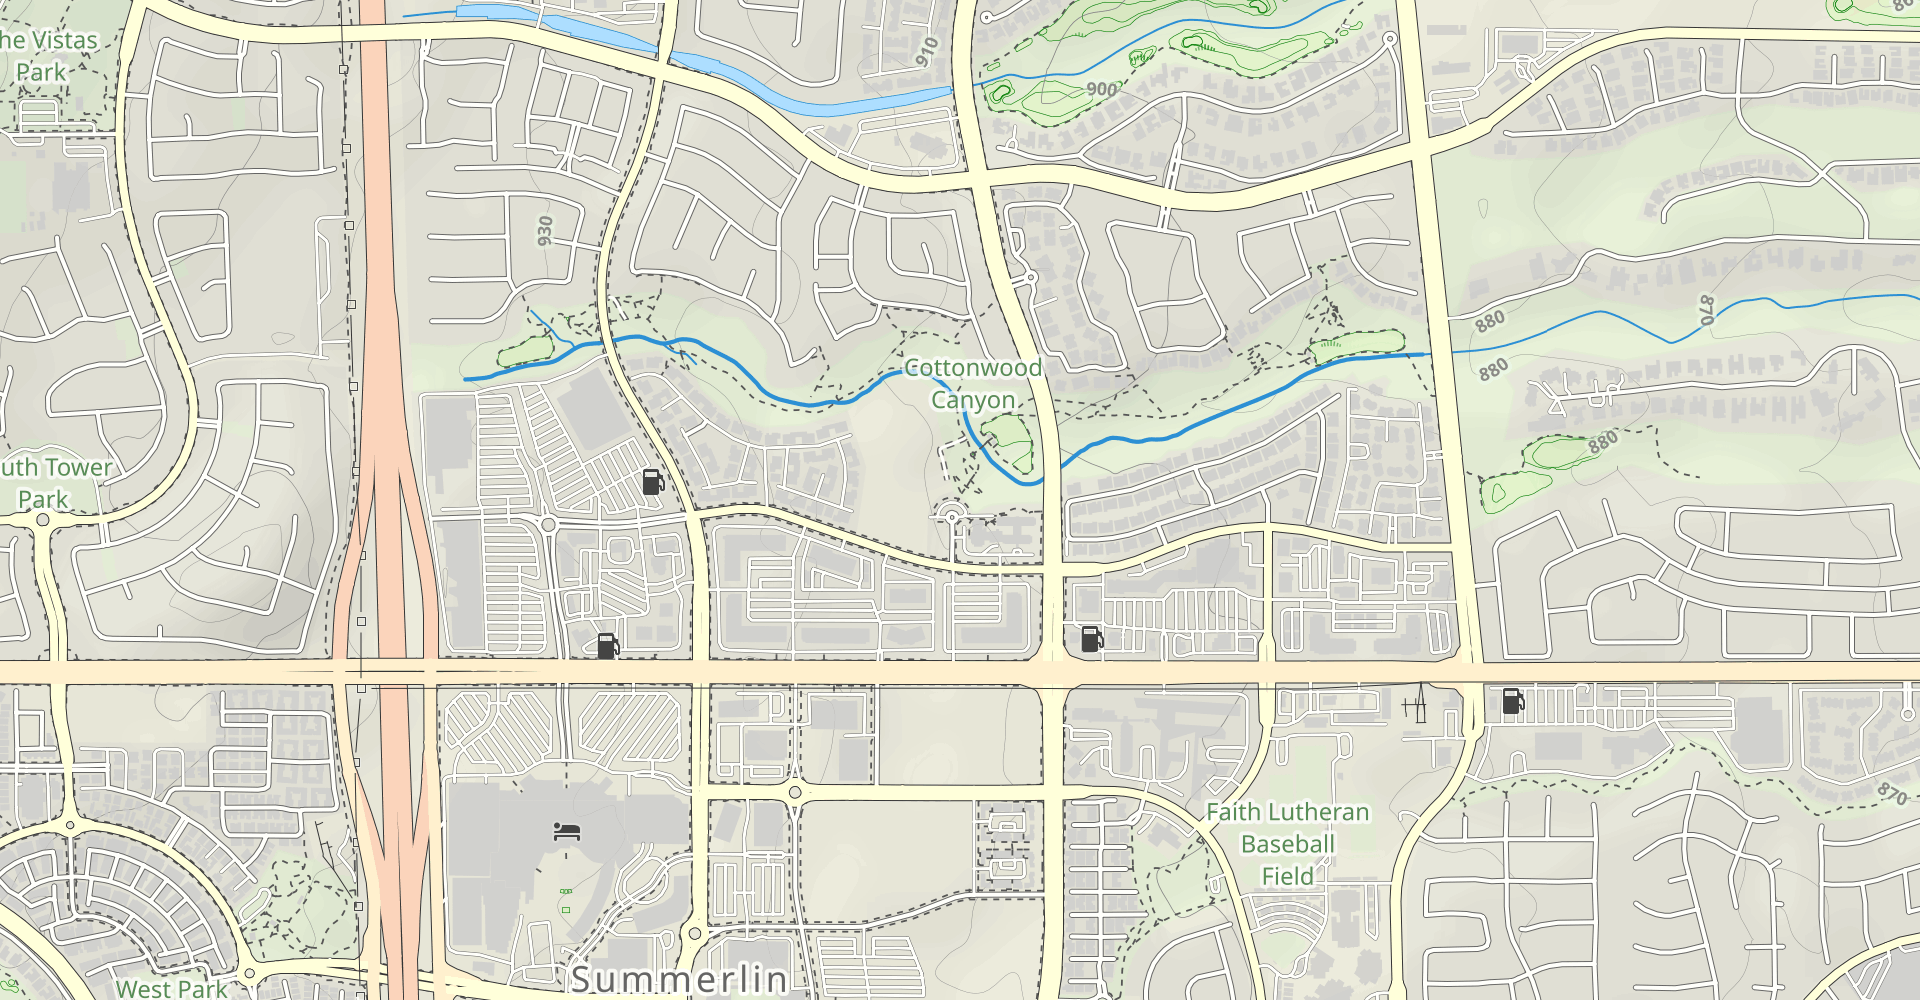 Summerlin Cottonwood Canyon Park Trail